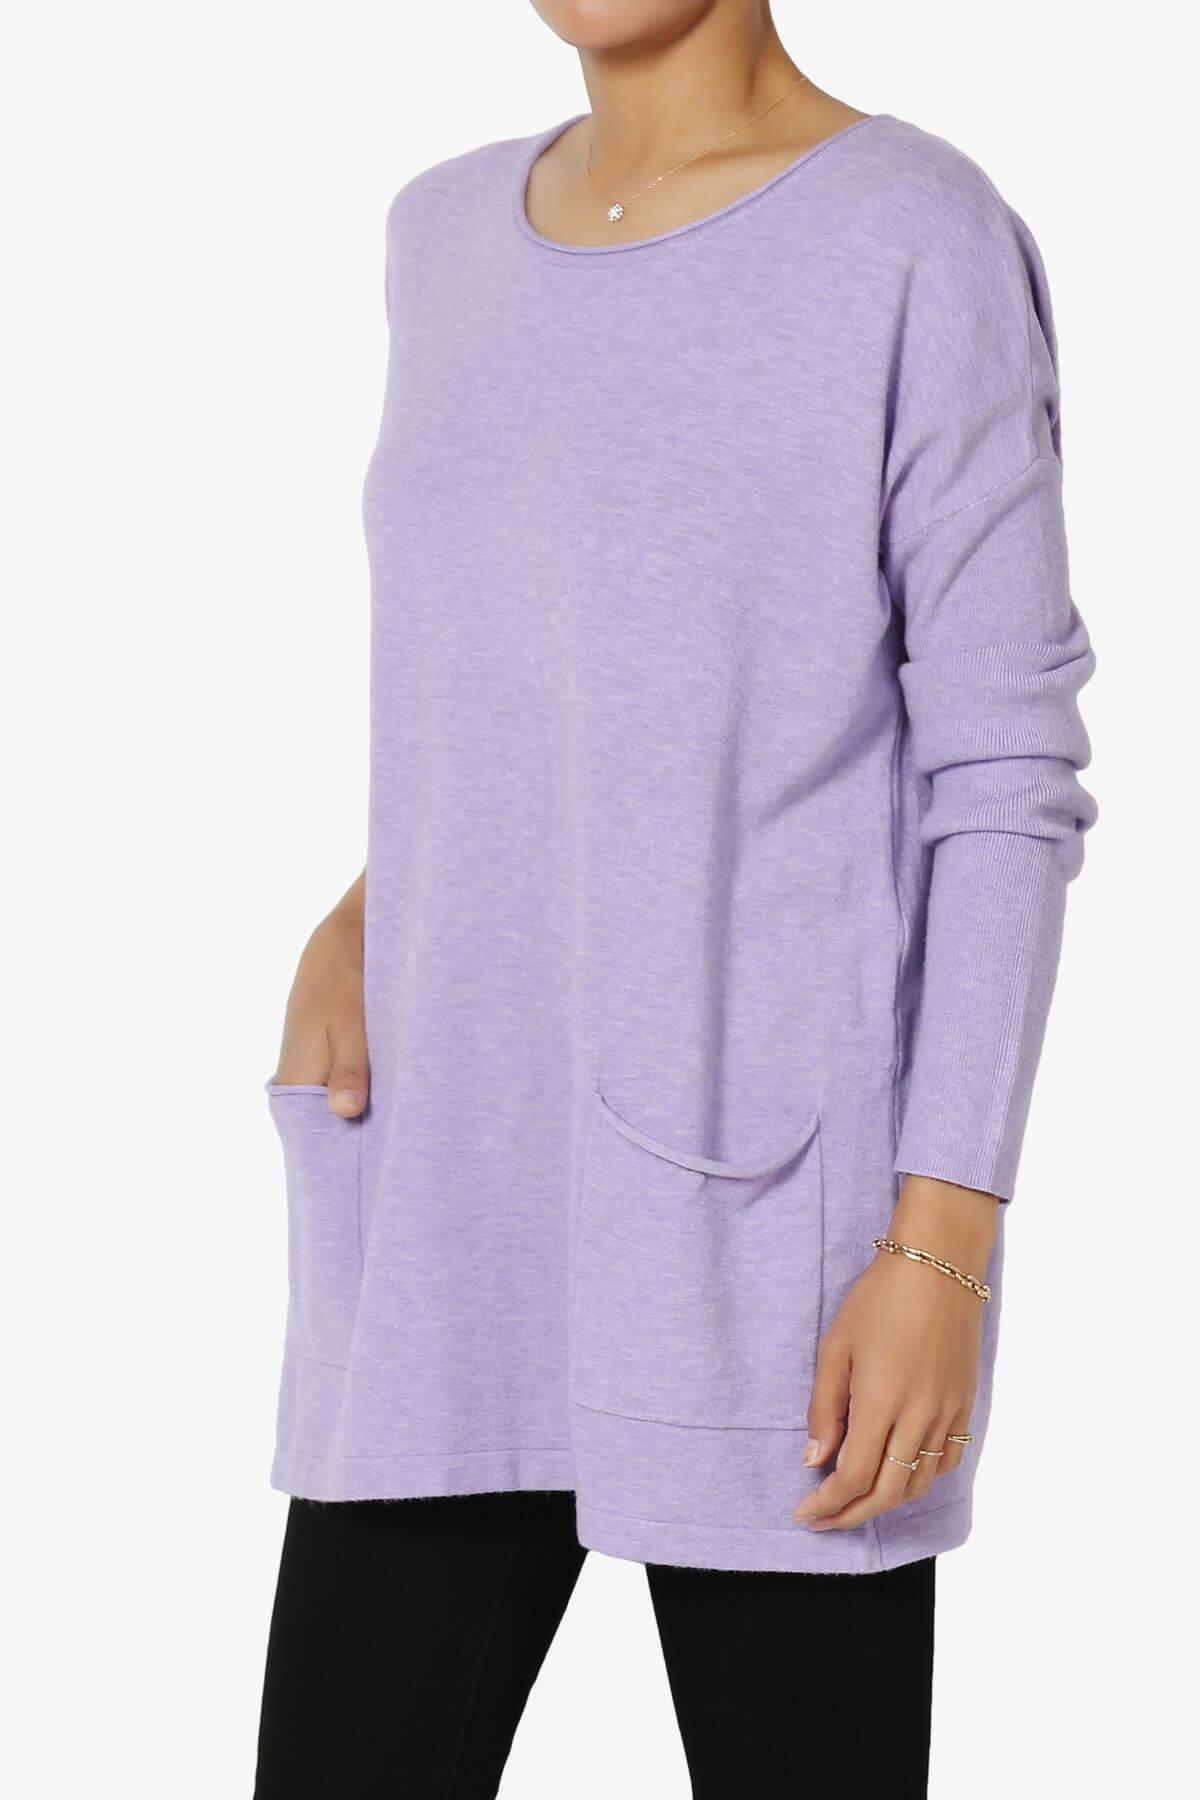 Load image into Gallery viewer, Brecken Pocket Long Sleeve Soft Knit Sweater Tunic LAVENDER_3
